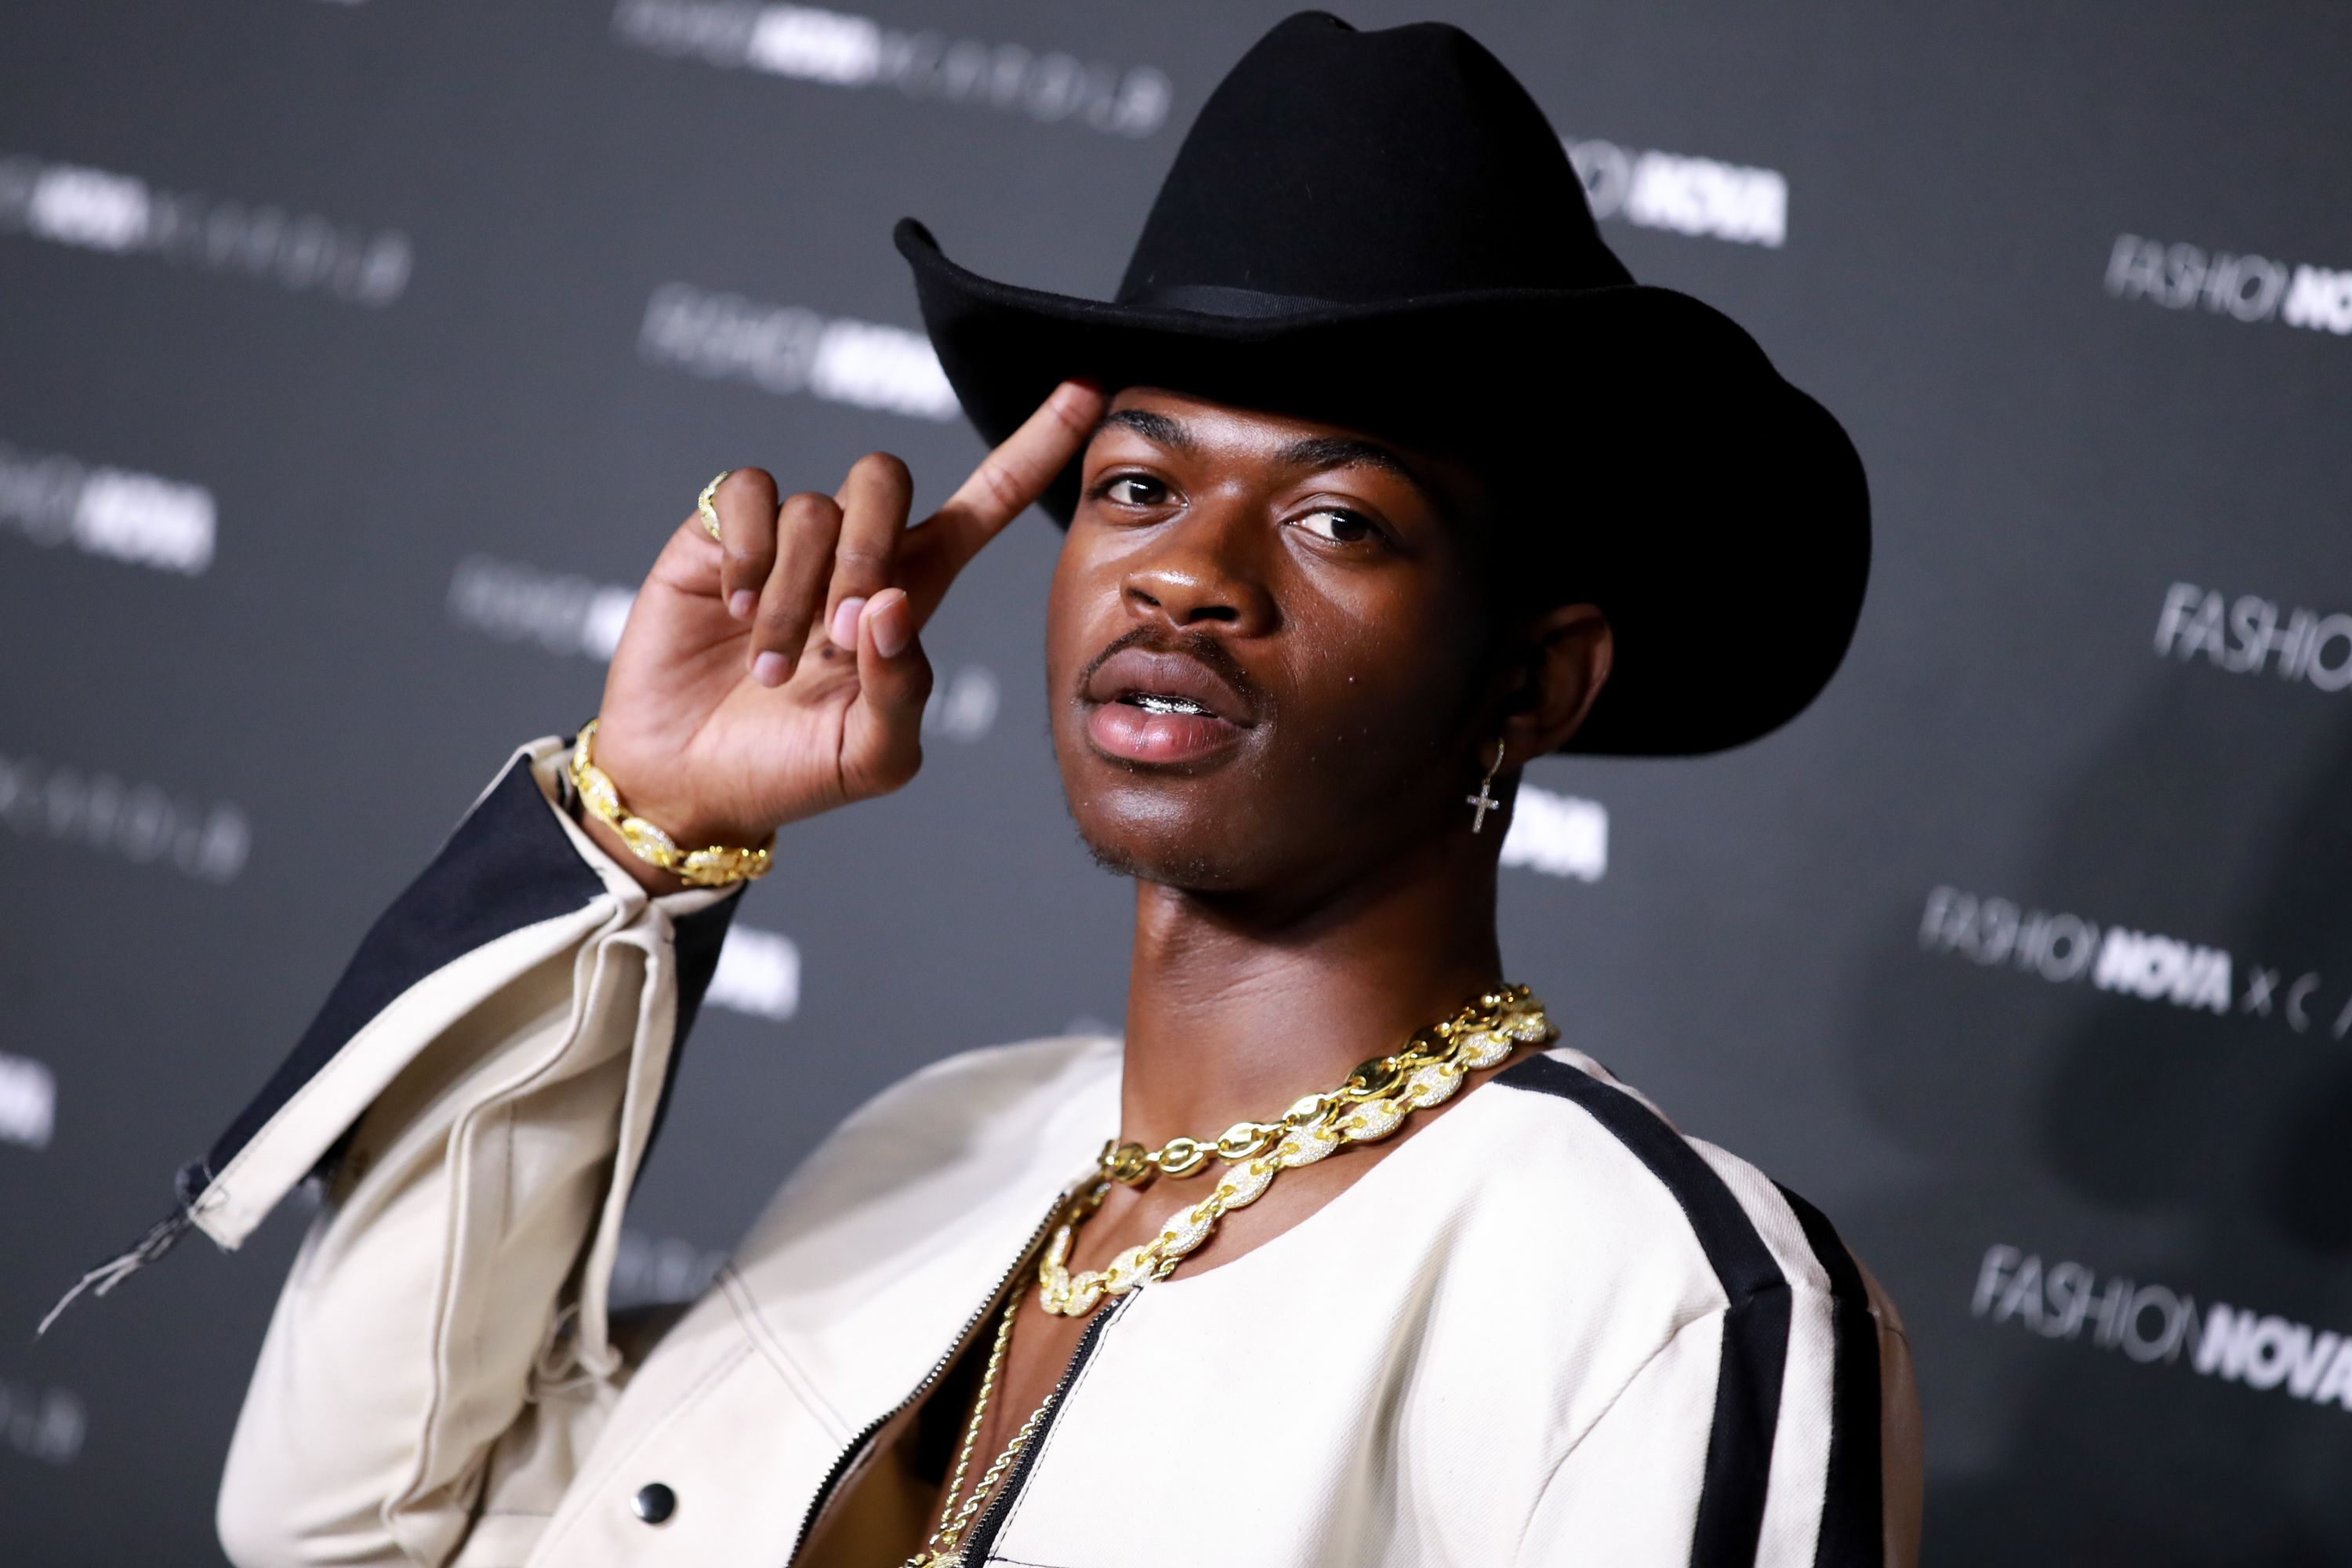 Wrangler catching heat for partnership with Lil Nas X | CNN